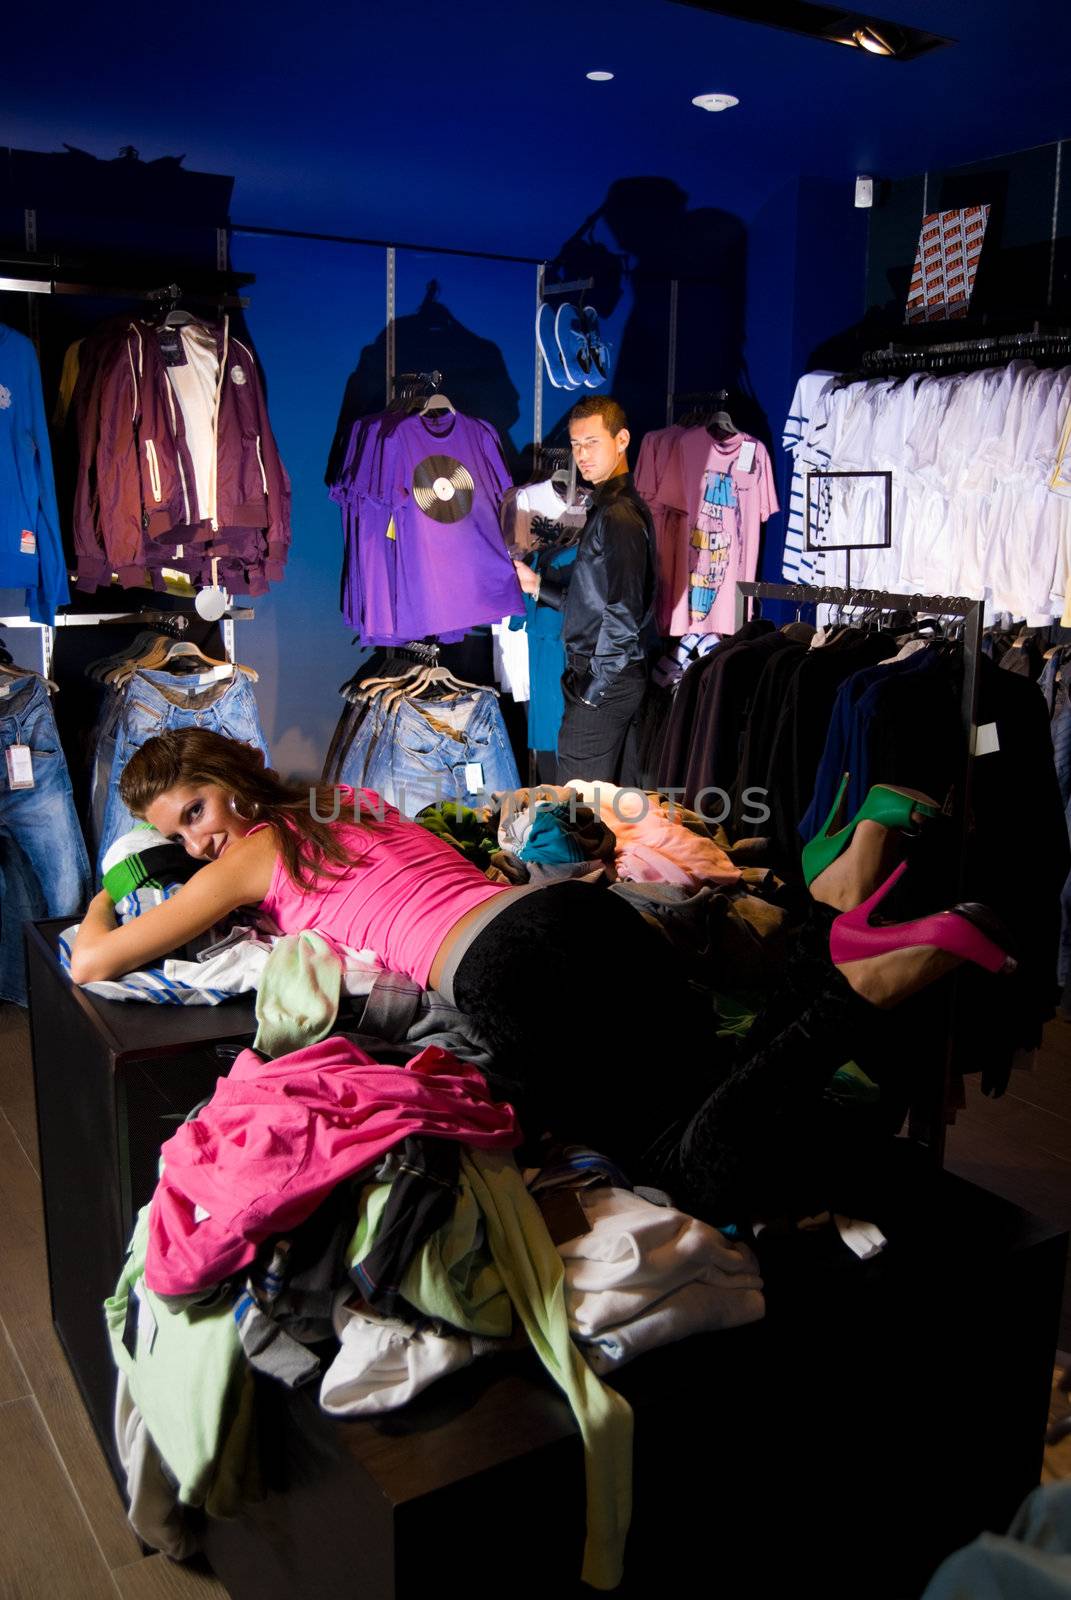 Pair of young adults in dress store. Girl lays on pile of shirts